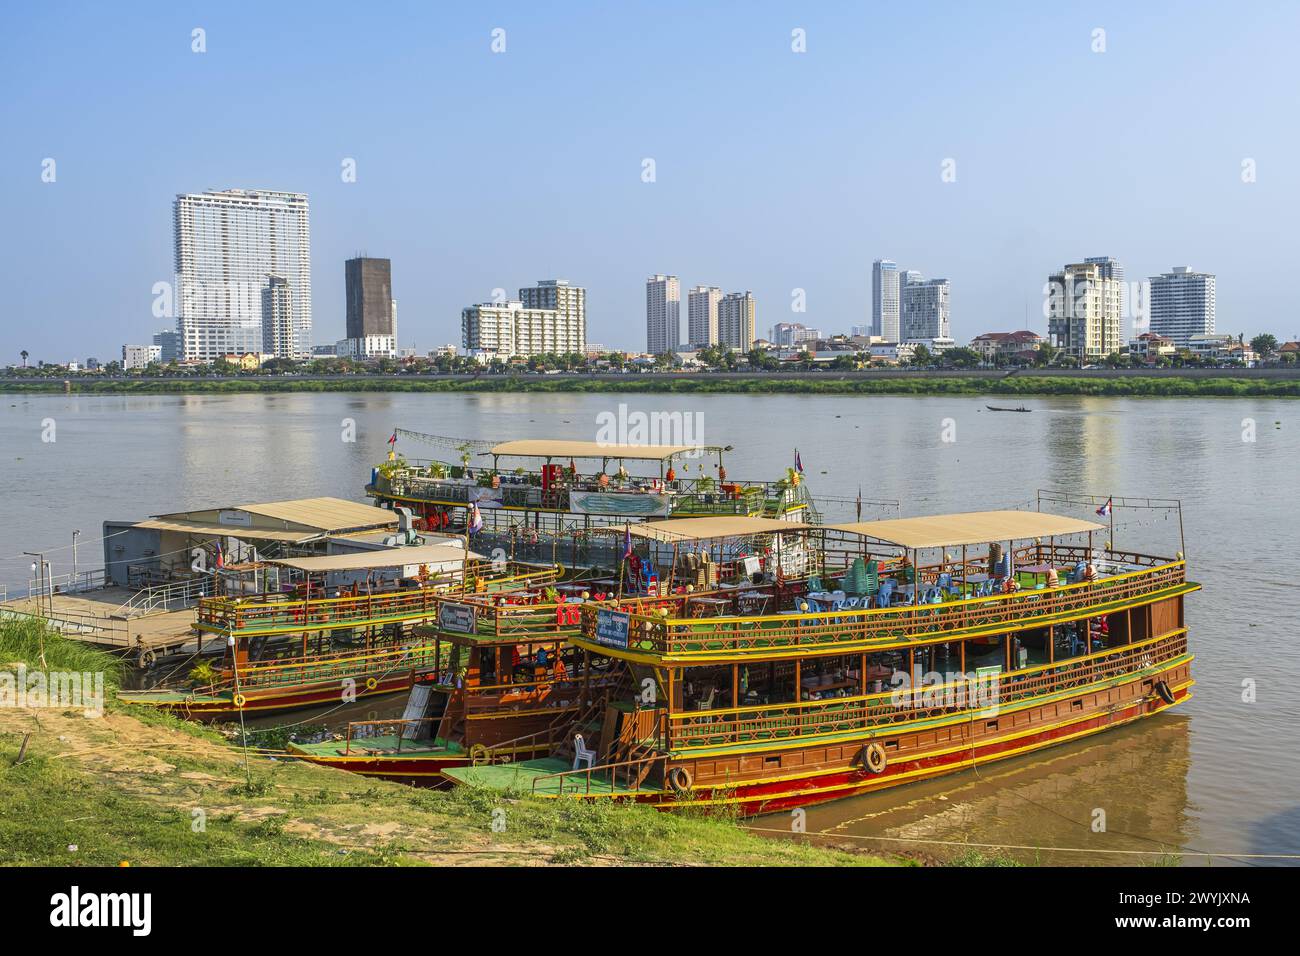 Cambodia, Phnom Penh, cruise boats on the Tonle Sap river and the buildings of the Chroy Changvar district Stock Photo